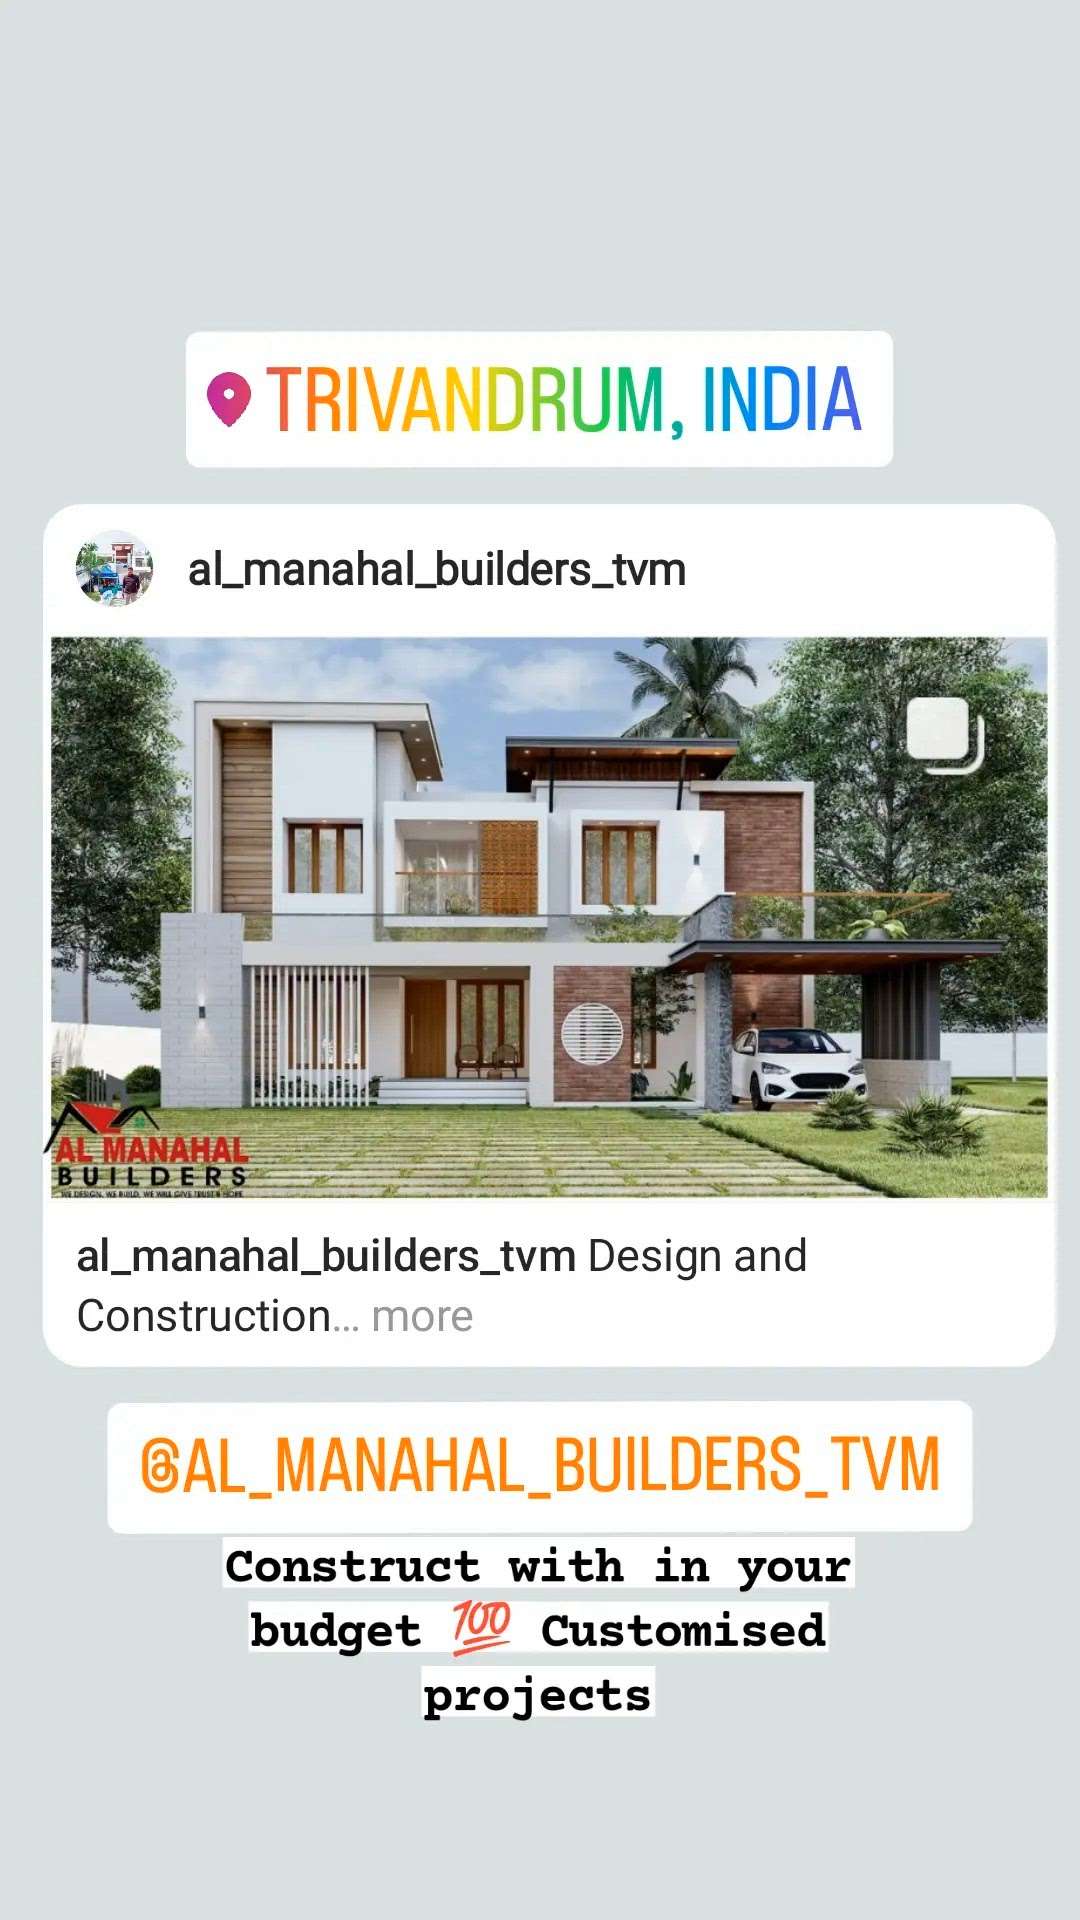 Design and Construction 
AL Manahal Builders and developers Neyyattinkara, Tvm 

Design and construct beyond your expectations ✅

Premium quality Customized Construction with in your budget

Call 7025569477
www.almanahalbuilders.com

#budgethome
#ContemporaryDesigns #contemperorylastestdesign #costumisedhomes  #almanahaltrivandrum #Erkishorkumar